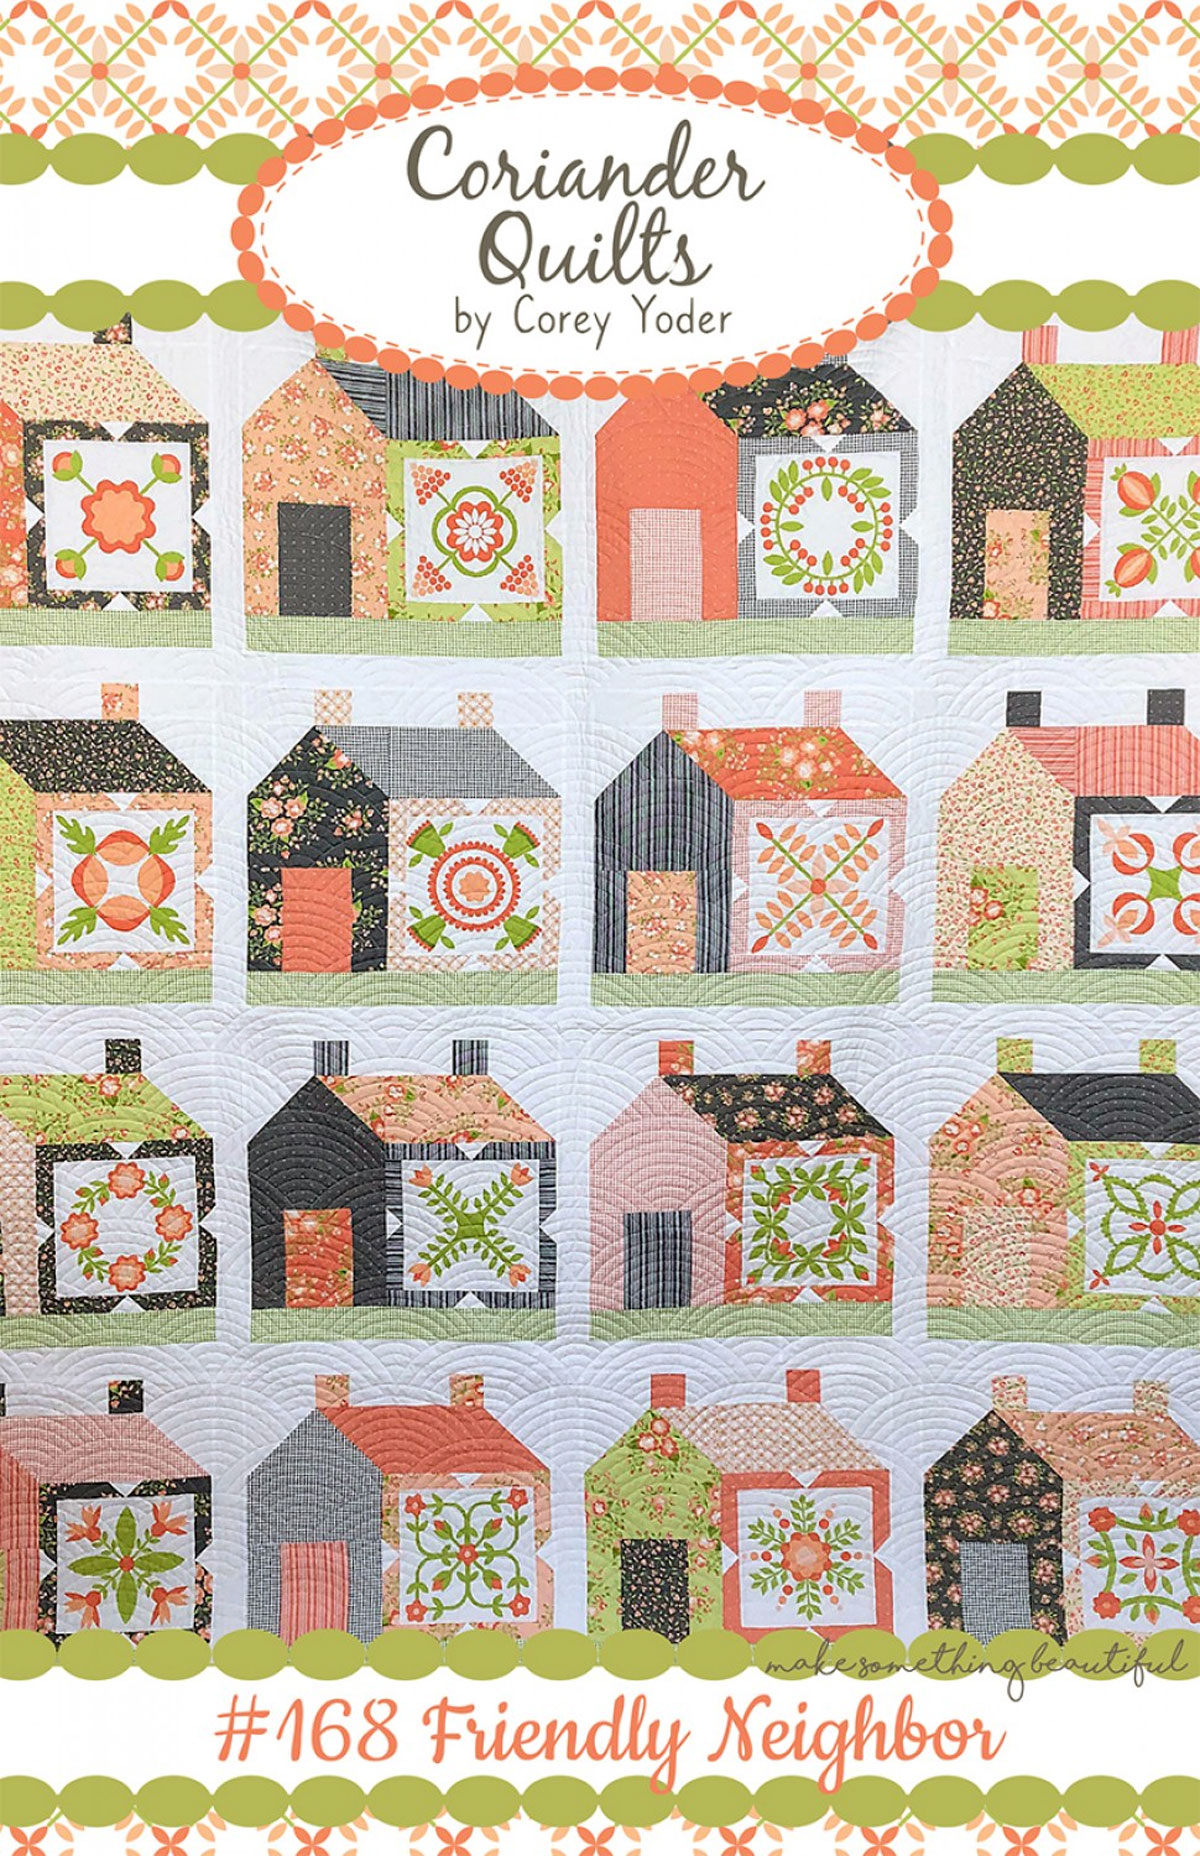 Friendly-Neighbor-quilt-sewing-pattern-Coriander-Quilts-front